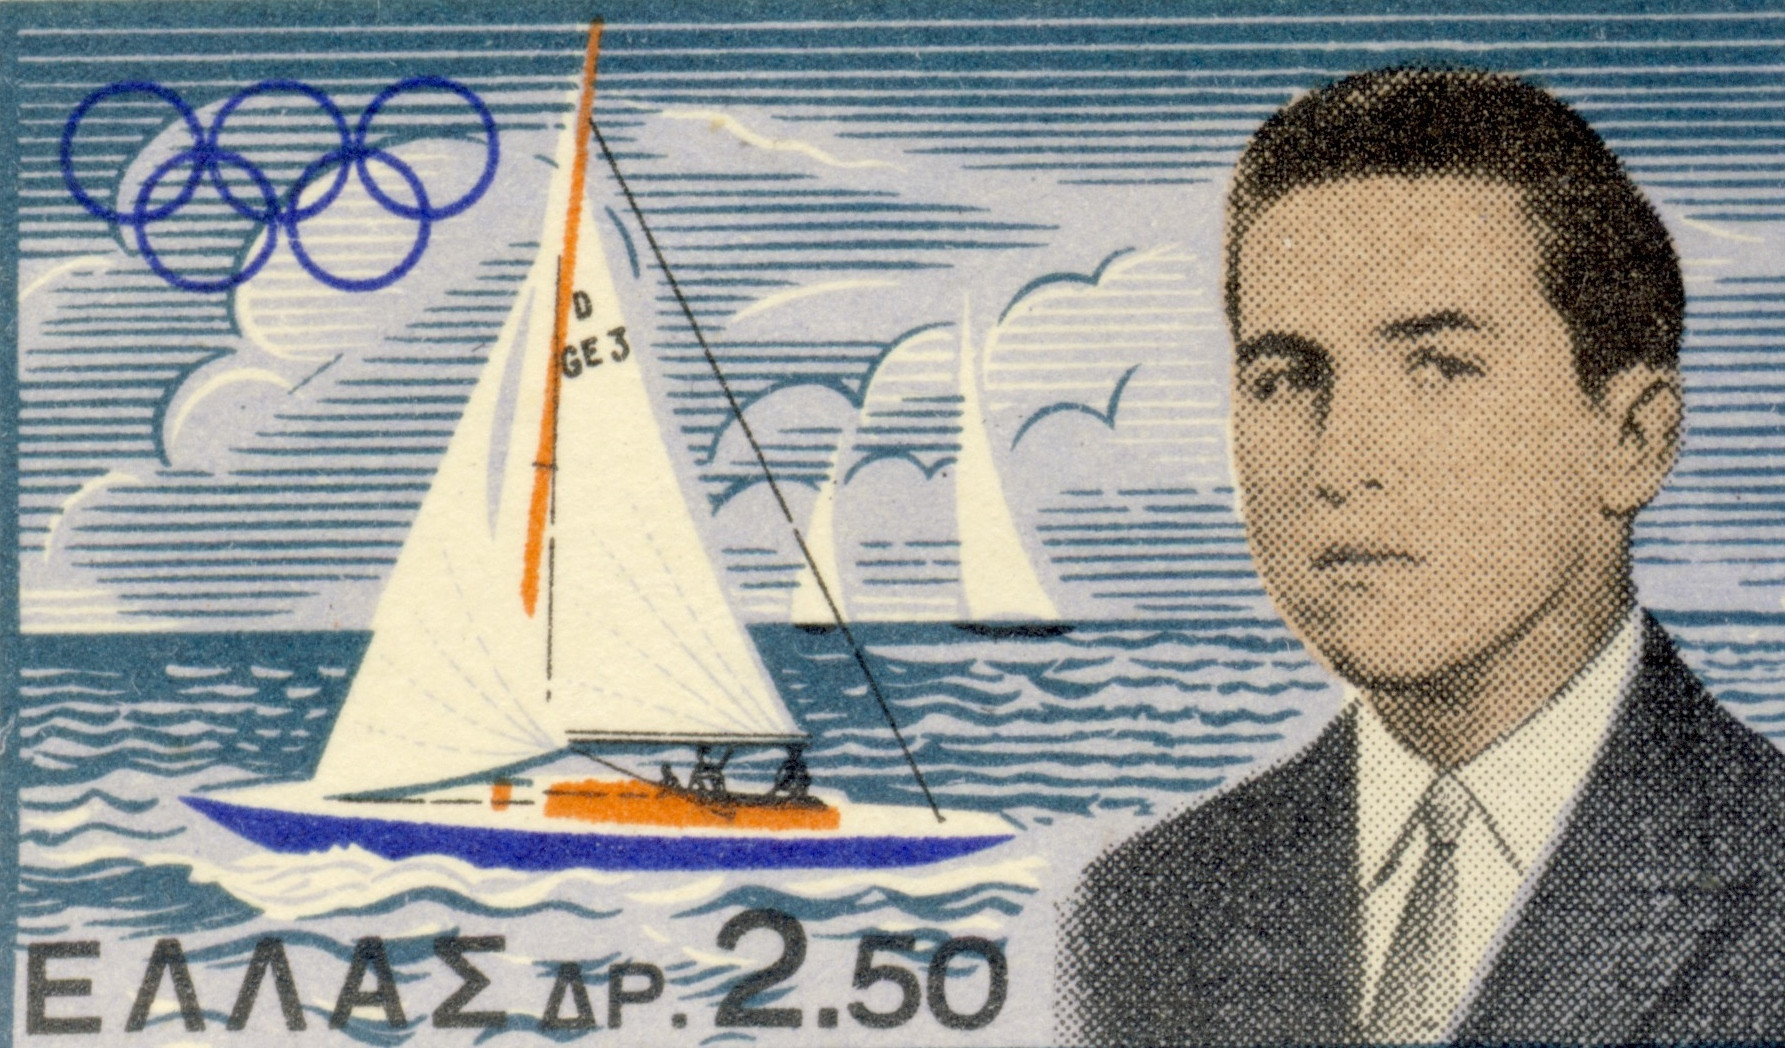 The Hellenic Post issued a special commemorative stamp to mark Prince Constantine's gold medal in 1960 ©Hellenic Post